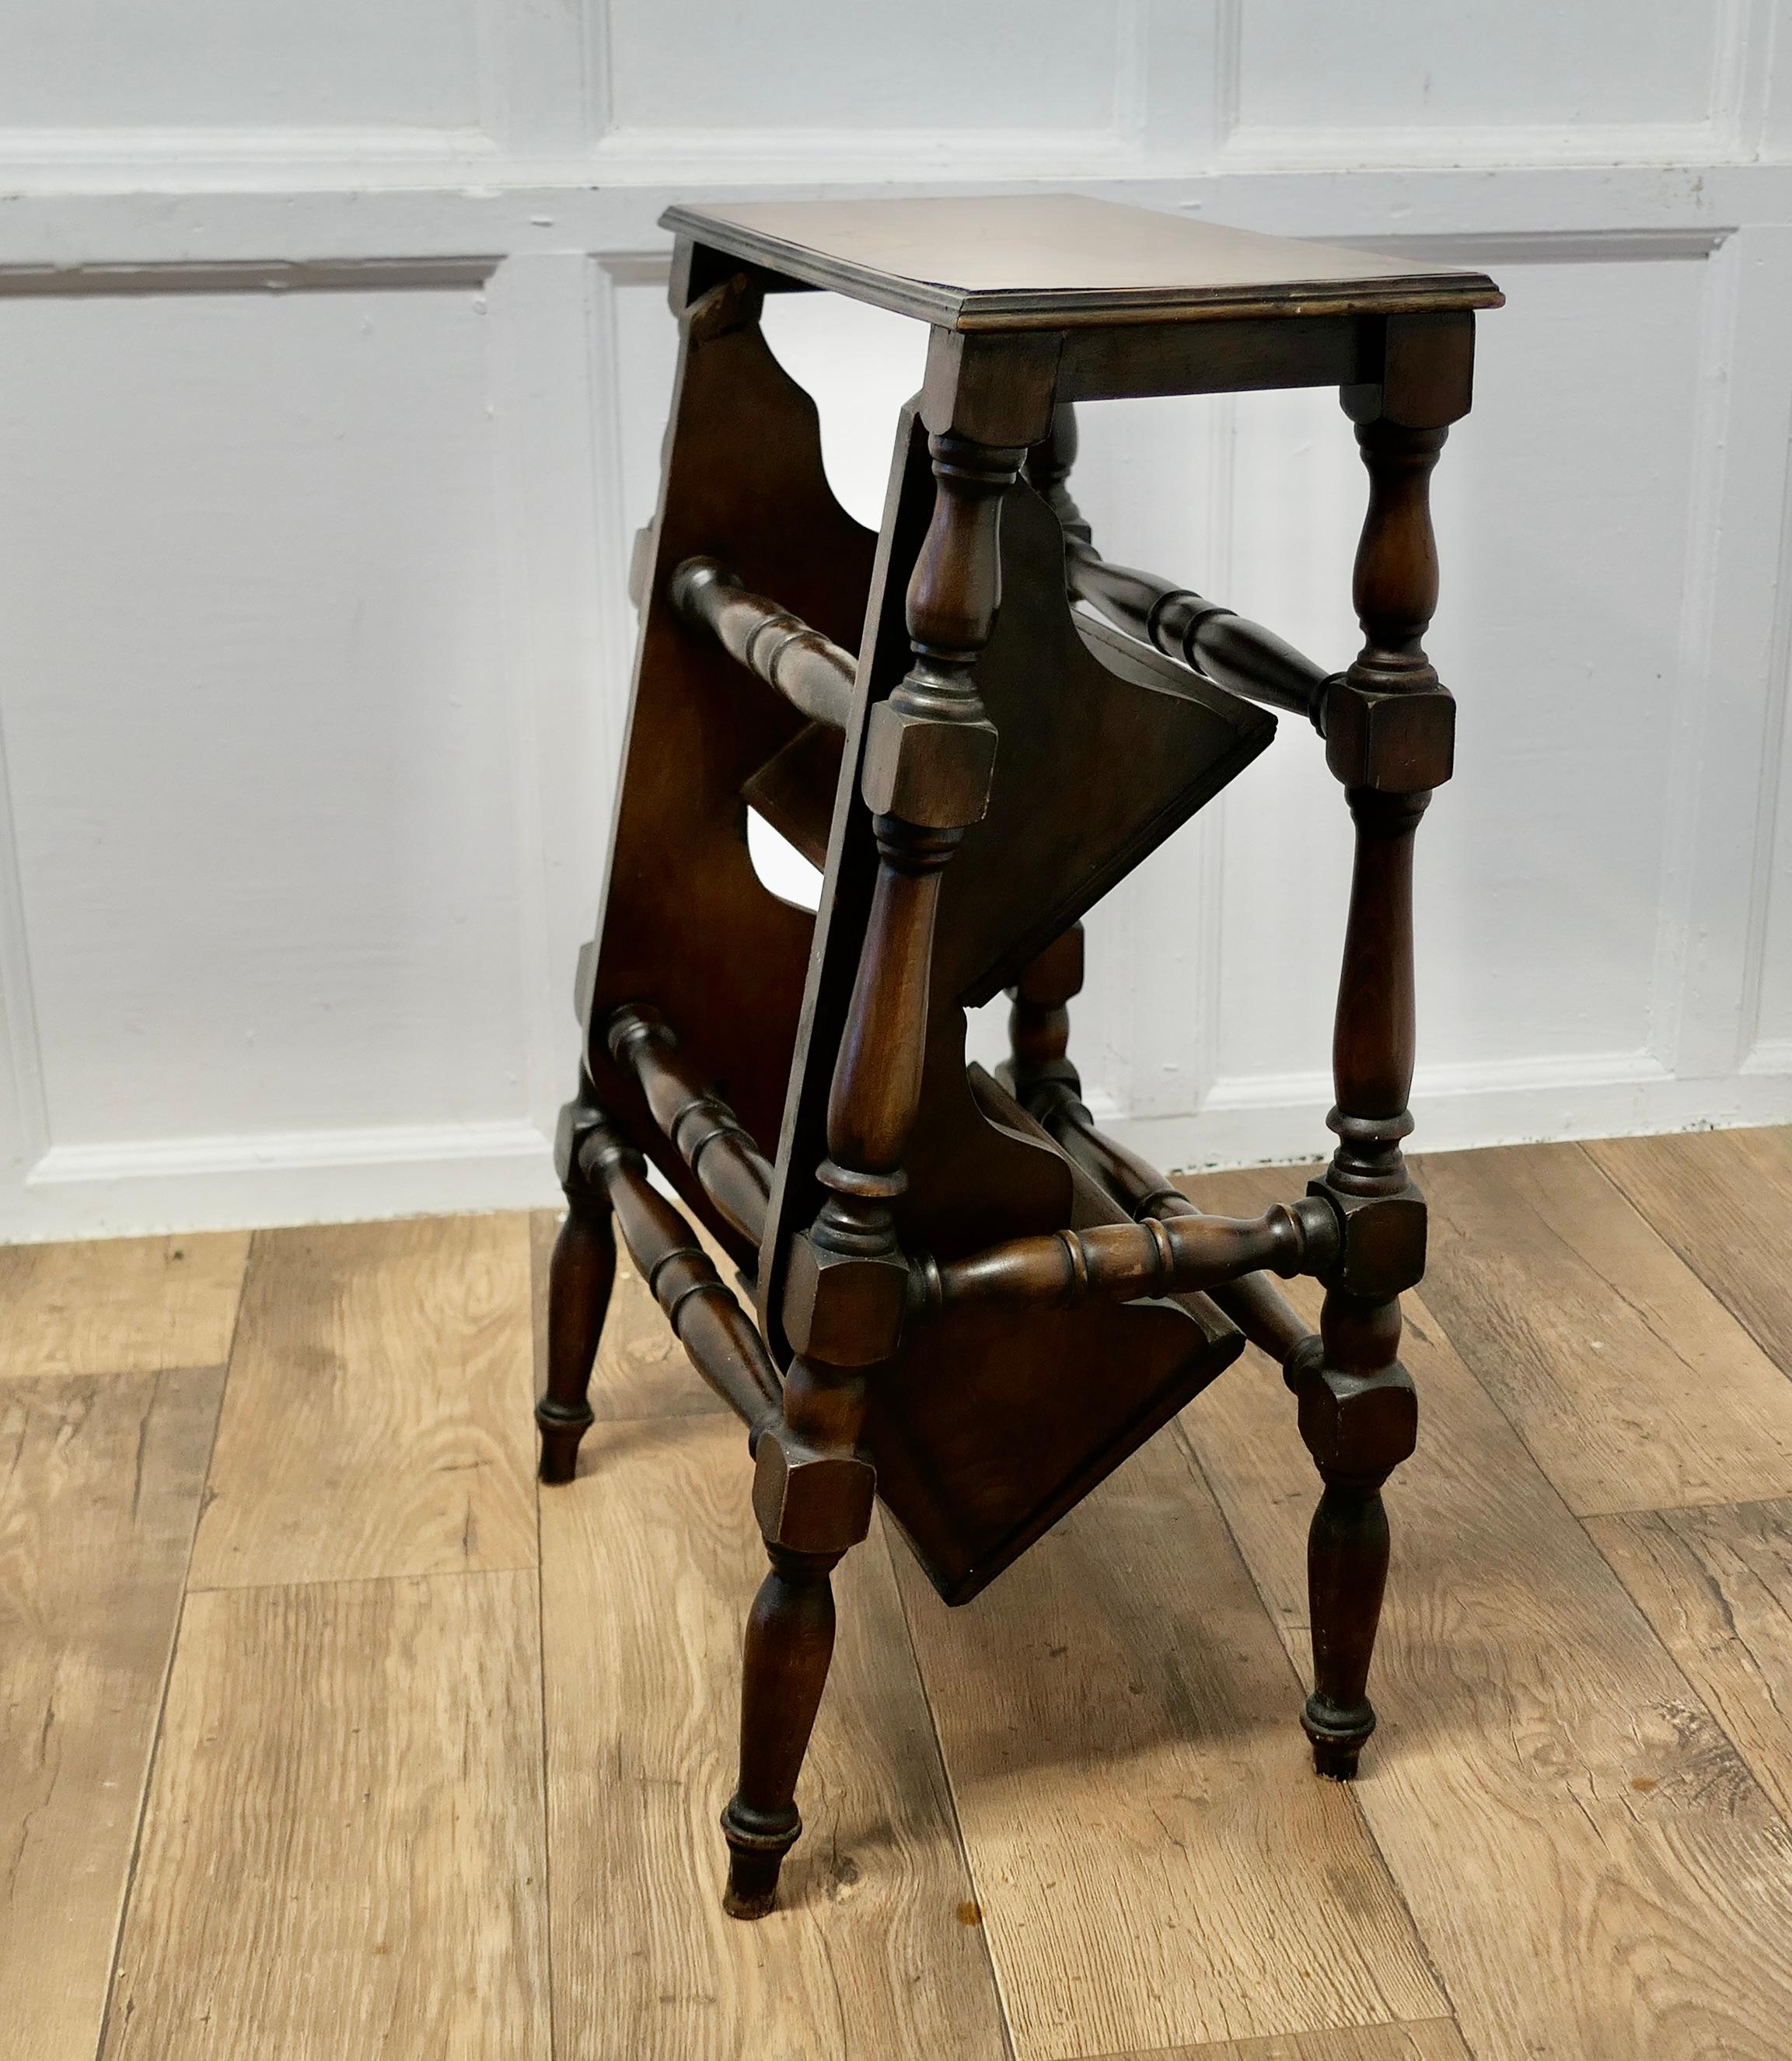 Metamorphic Library Step and High Stool

A very useful piece, this handy little stool can be flipped over and turned into a small 3 step ladder, originally this type of stool was used in a Library hence the name, but it would work just as well in a